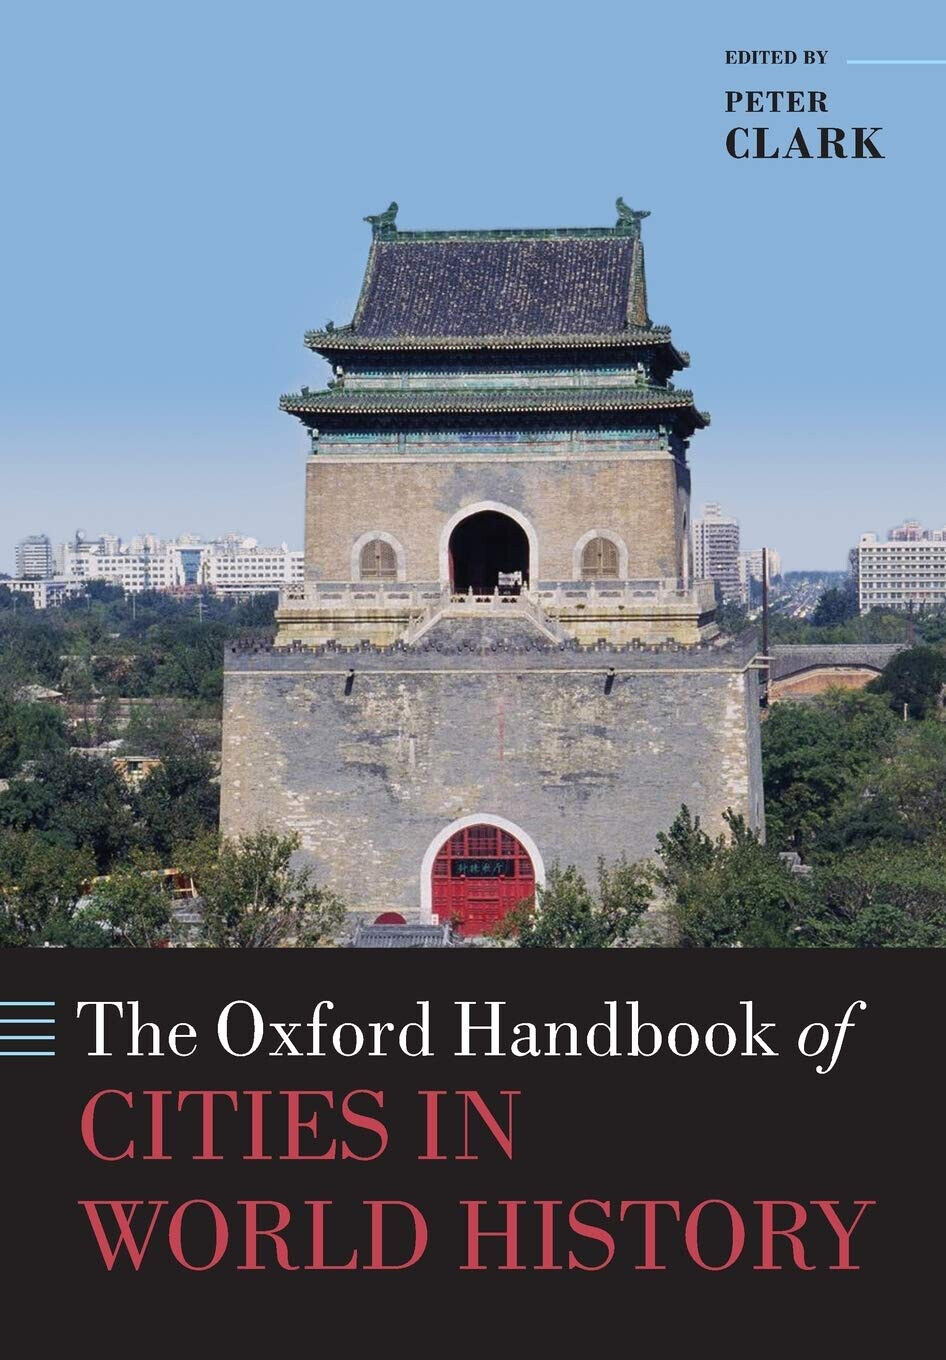 The Oxford Handbook of Cities in World History - Peter Clark - Oxford, 2016